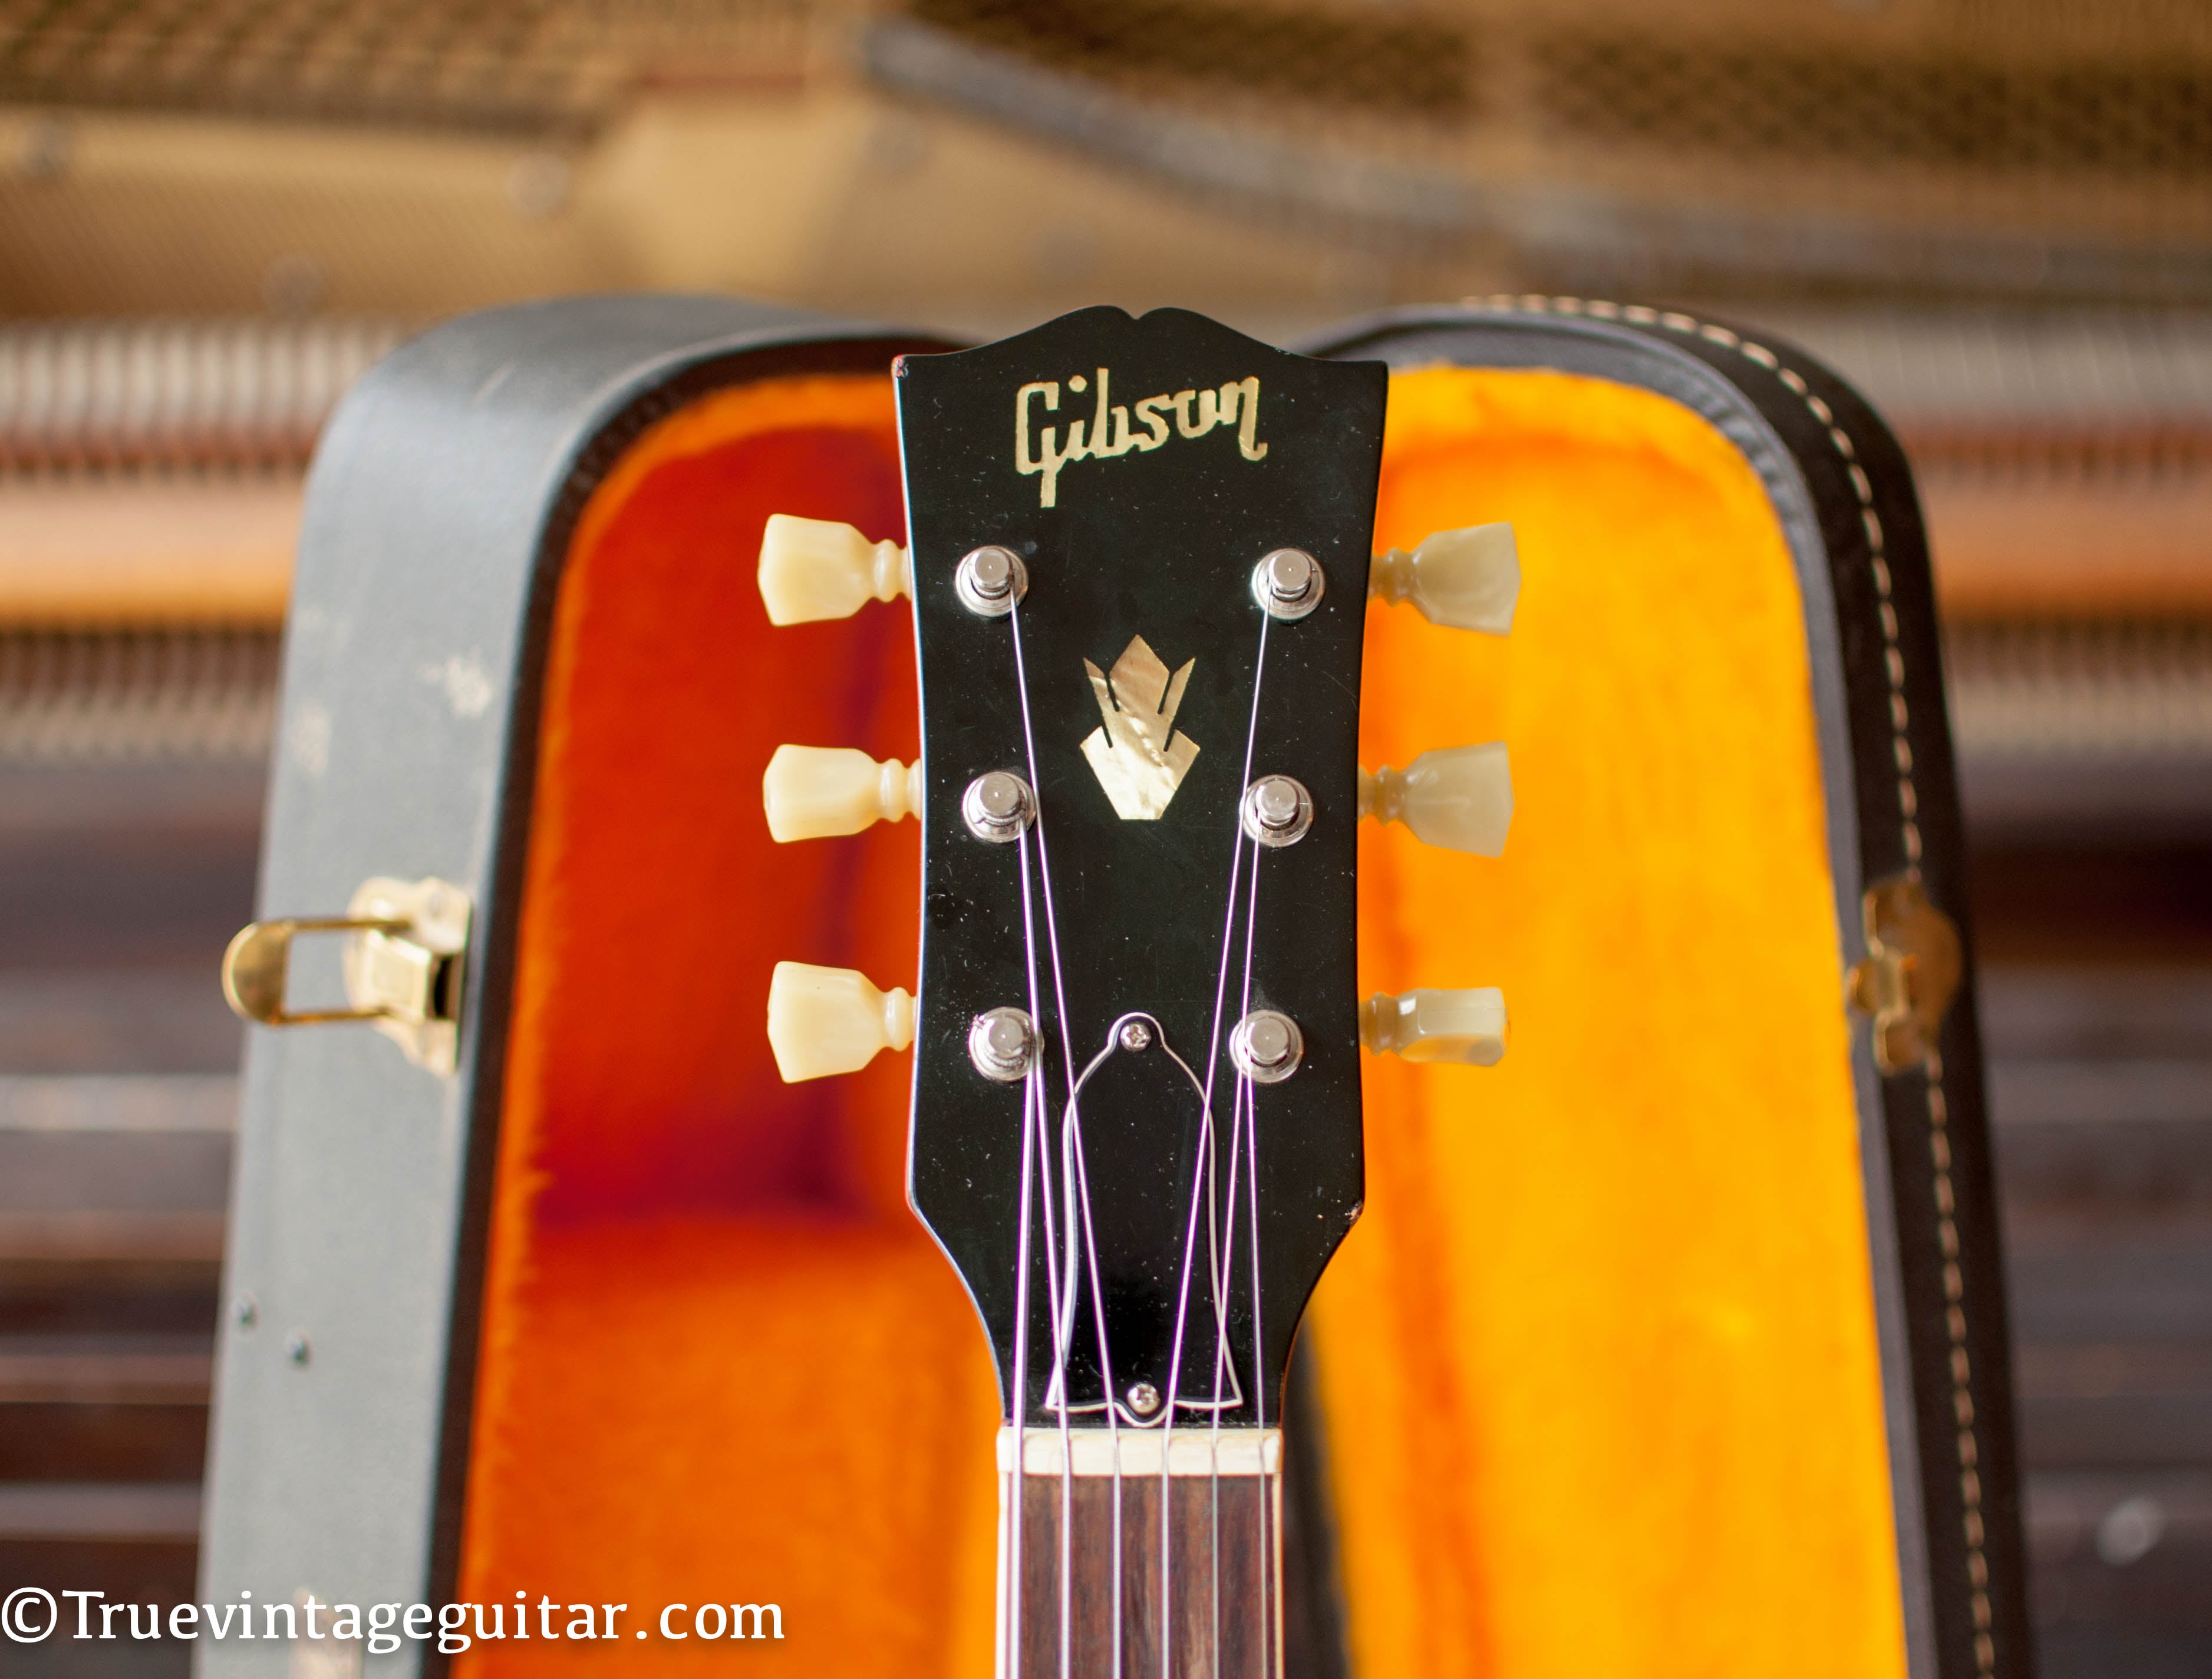 Headstock, Vintage 1966 Gibson ES-335 tdc electric guitar